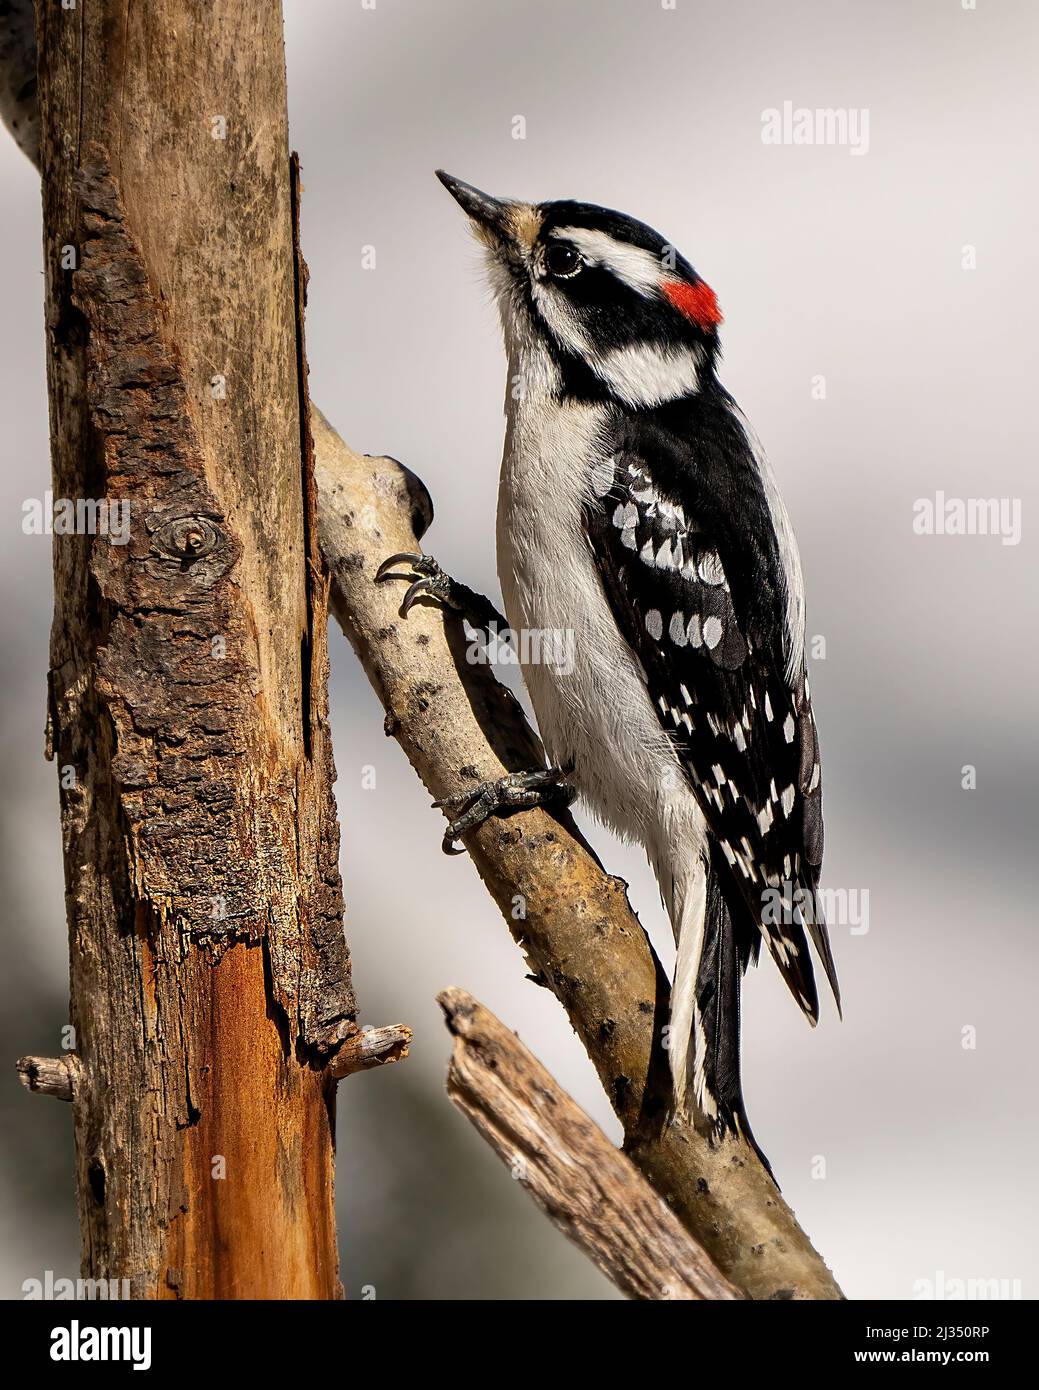 Downy Woodpecker male on a tree branch with a blur background in its environment and habitat surrounding displaying white and black feather plumage. Stock Photo